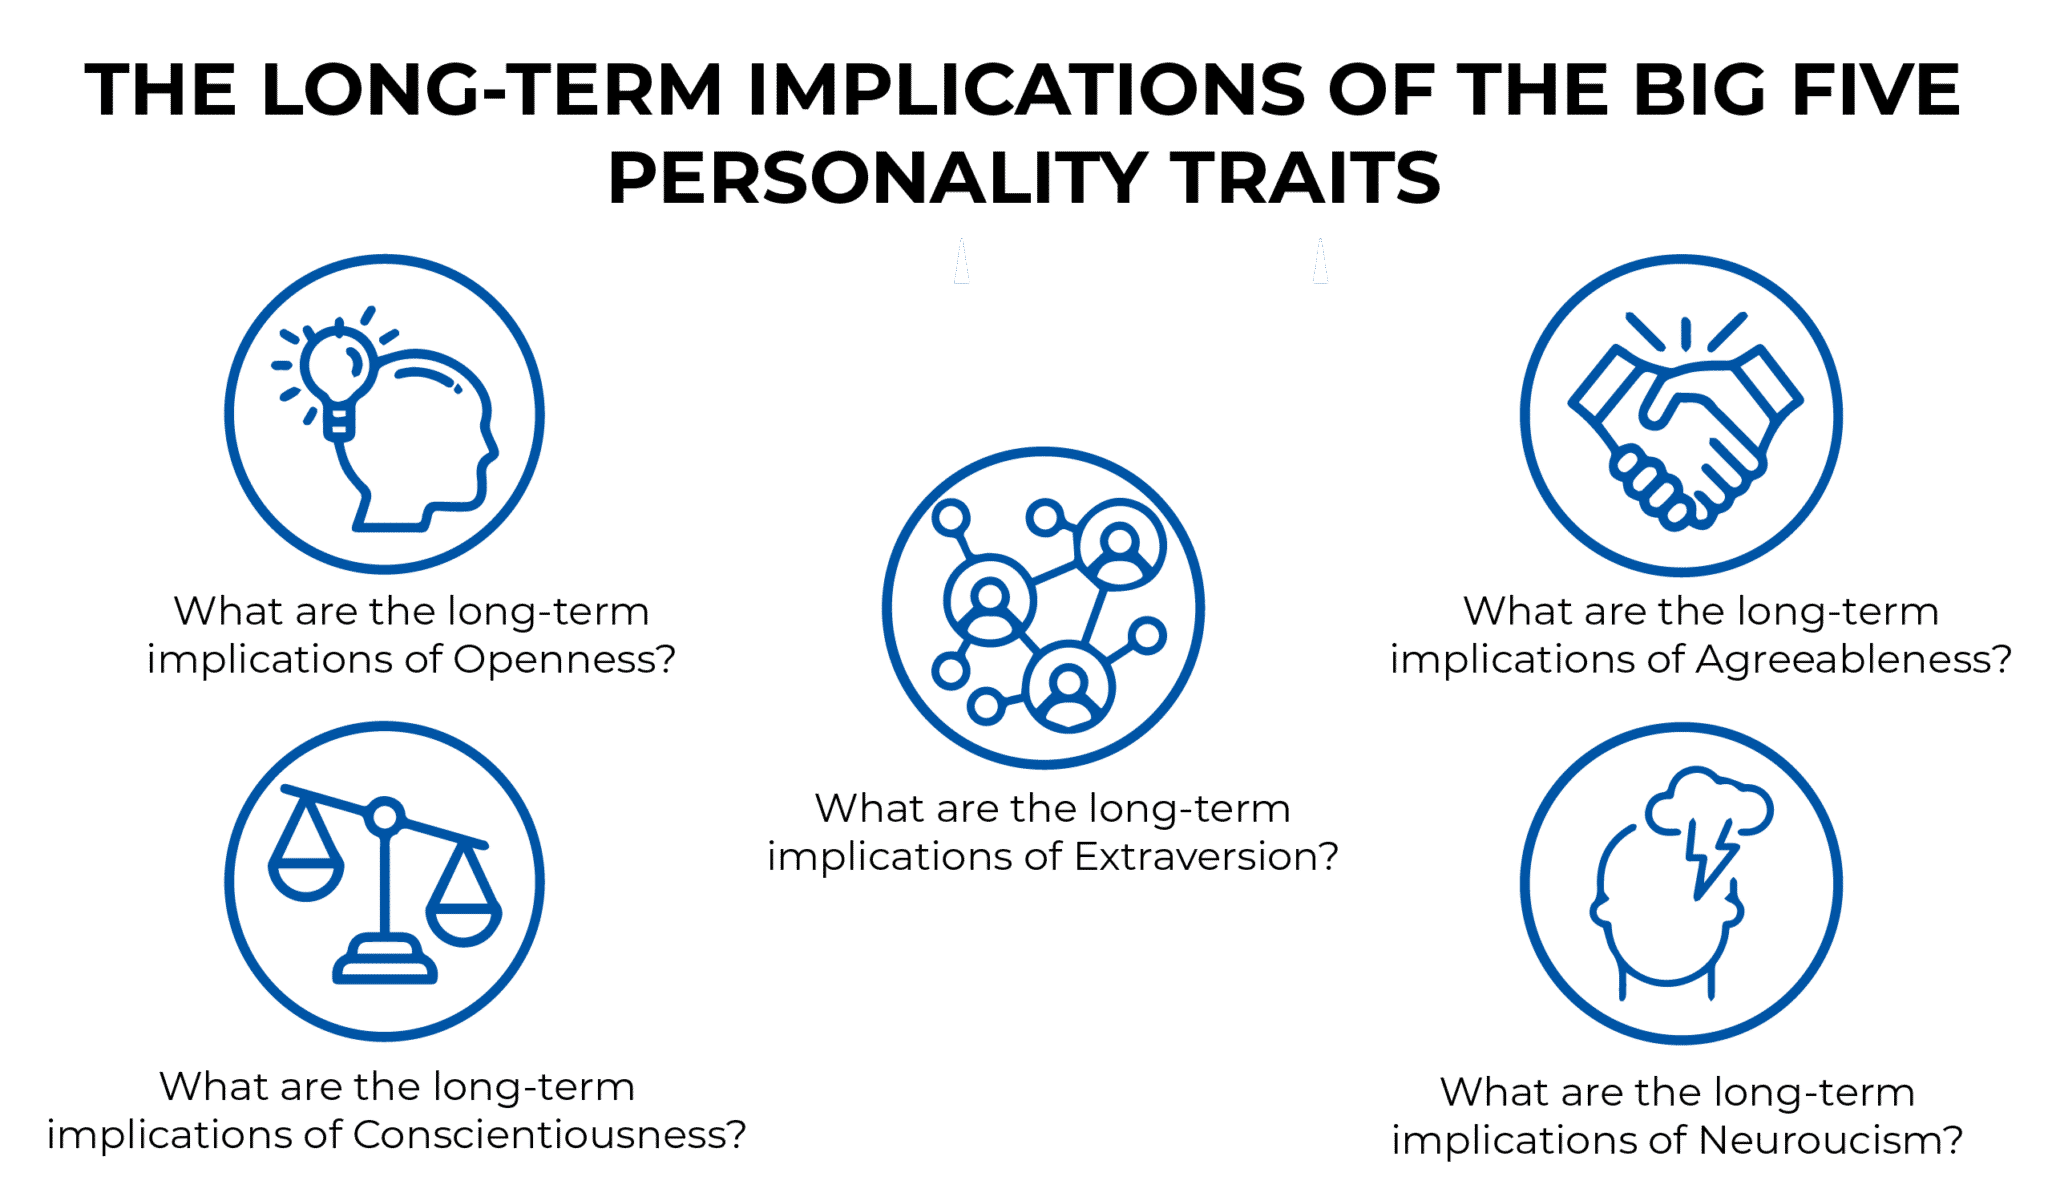 THE LONG-TERM IMPLICATIONS OF THE BIG FIVE PERSONALITY TRAITS